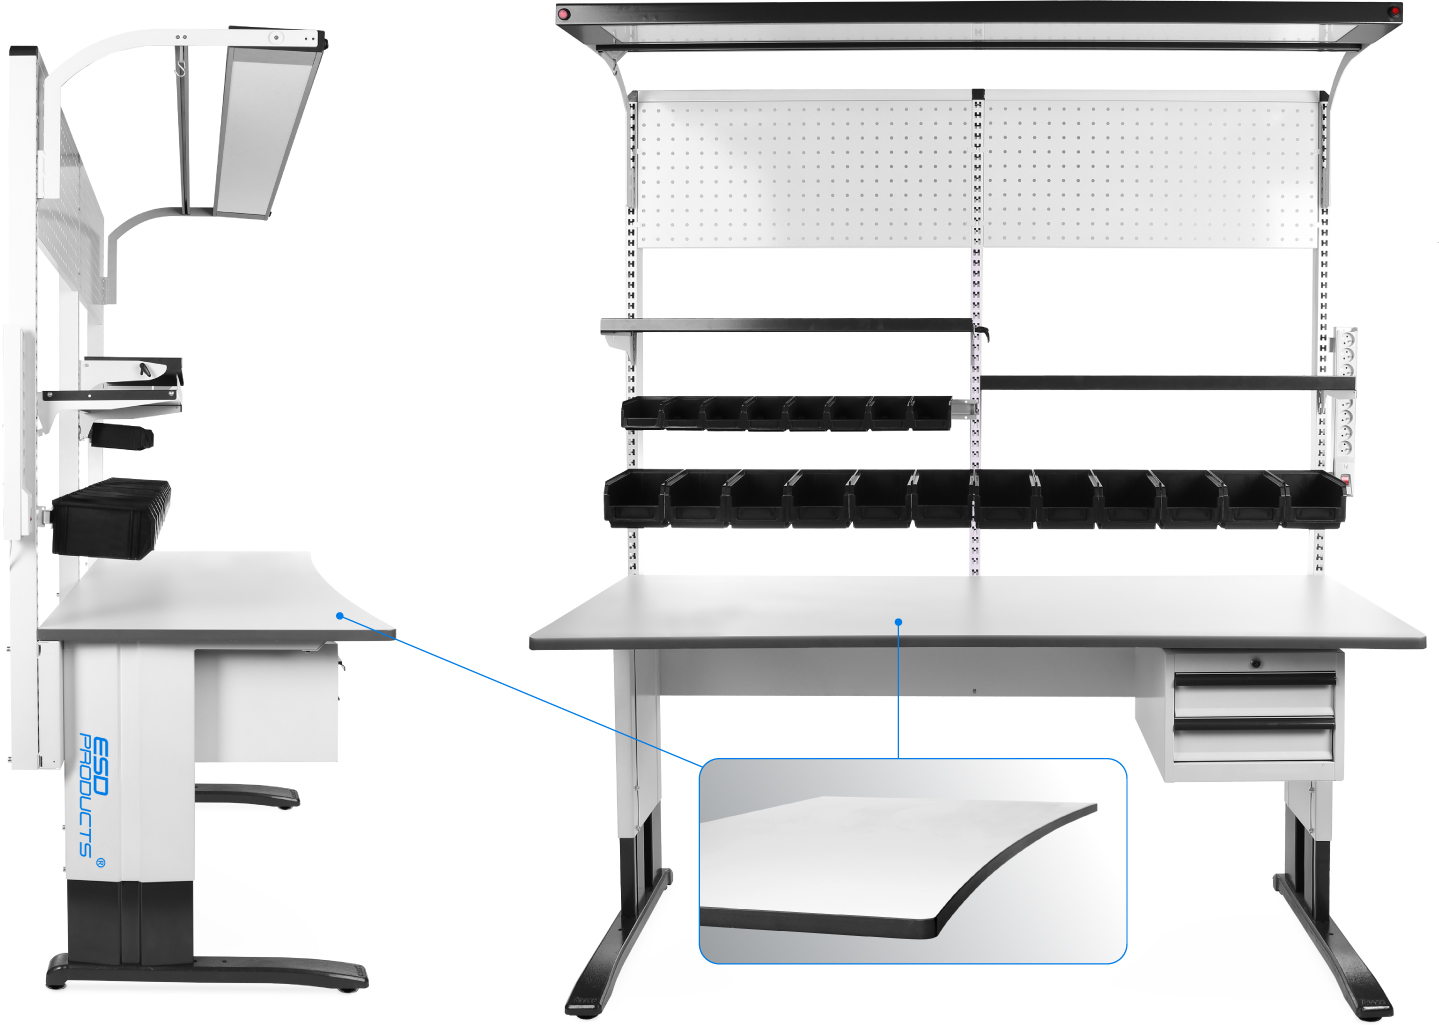 Premium-Workstation-ESD-Ergonomic-Table-Top-Reeco-Robert-1530-x-800-mm-ESD-Products-AES